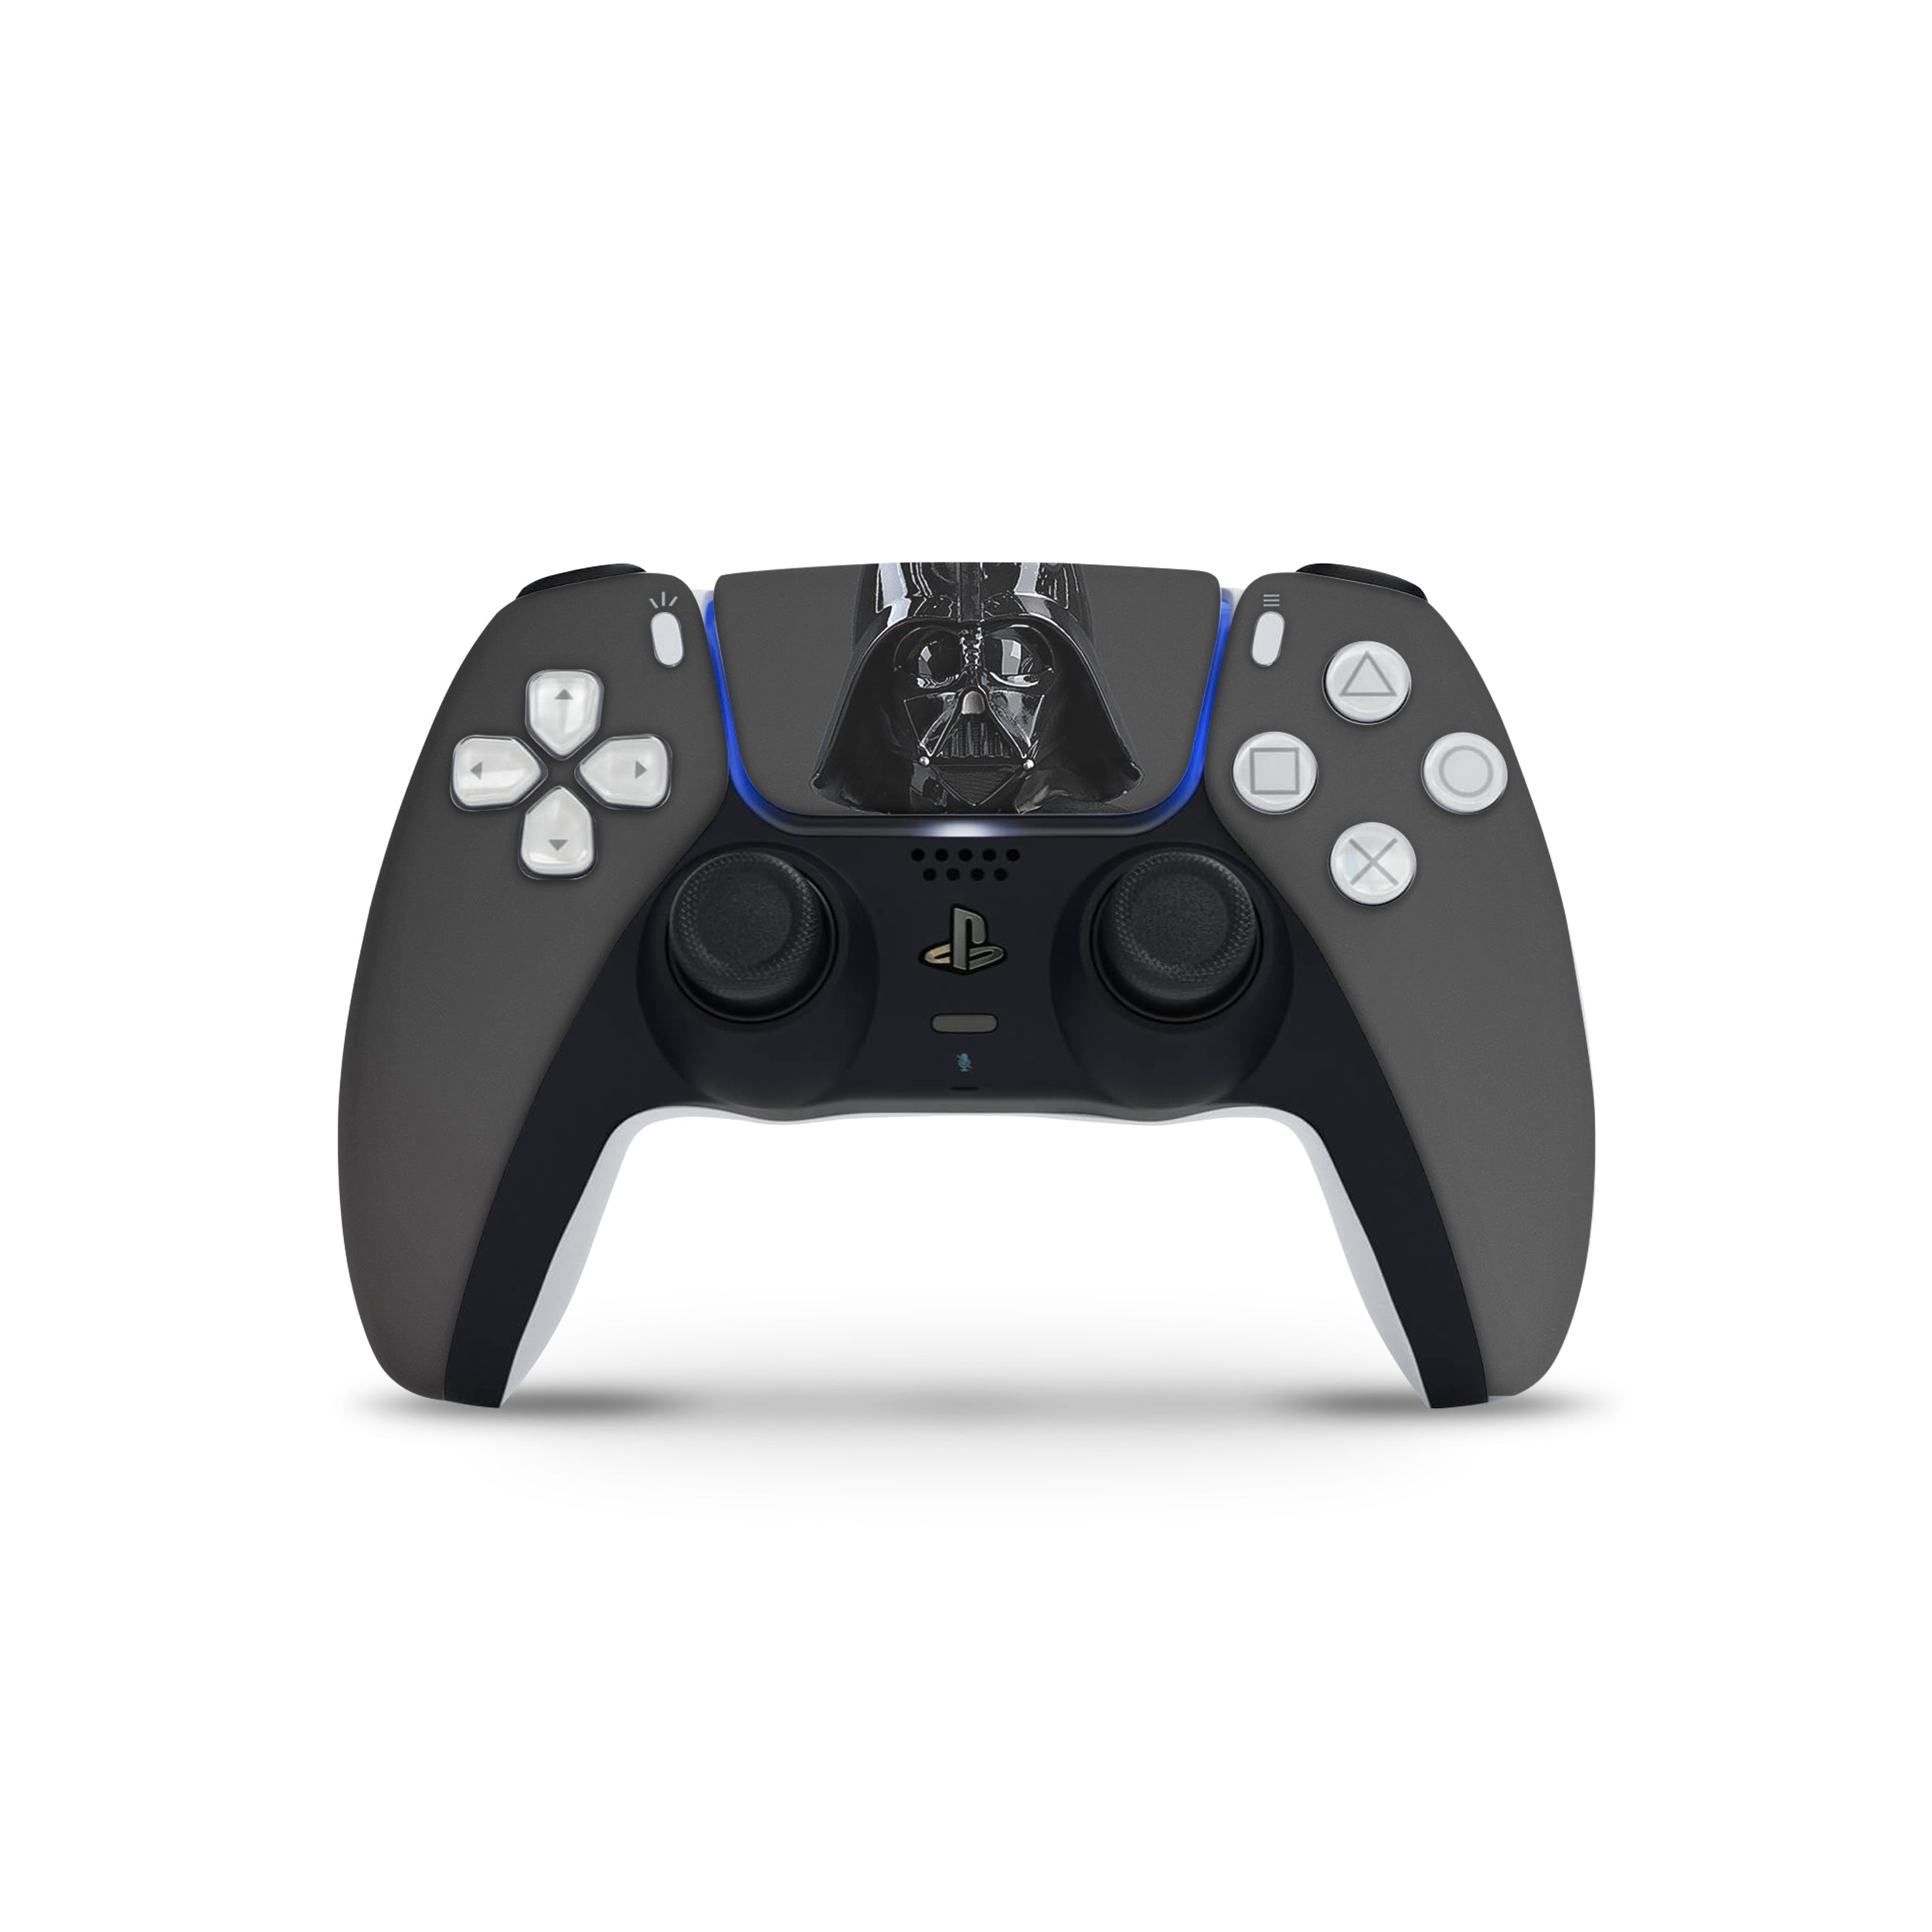 A video game skin featuring a Star Wars Darth Vader design for the PS5 DualSense Controller.